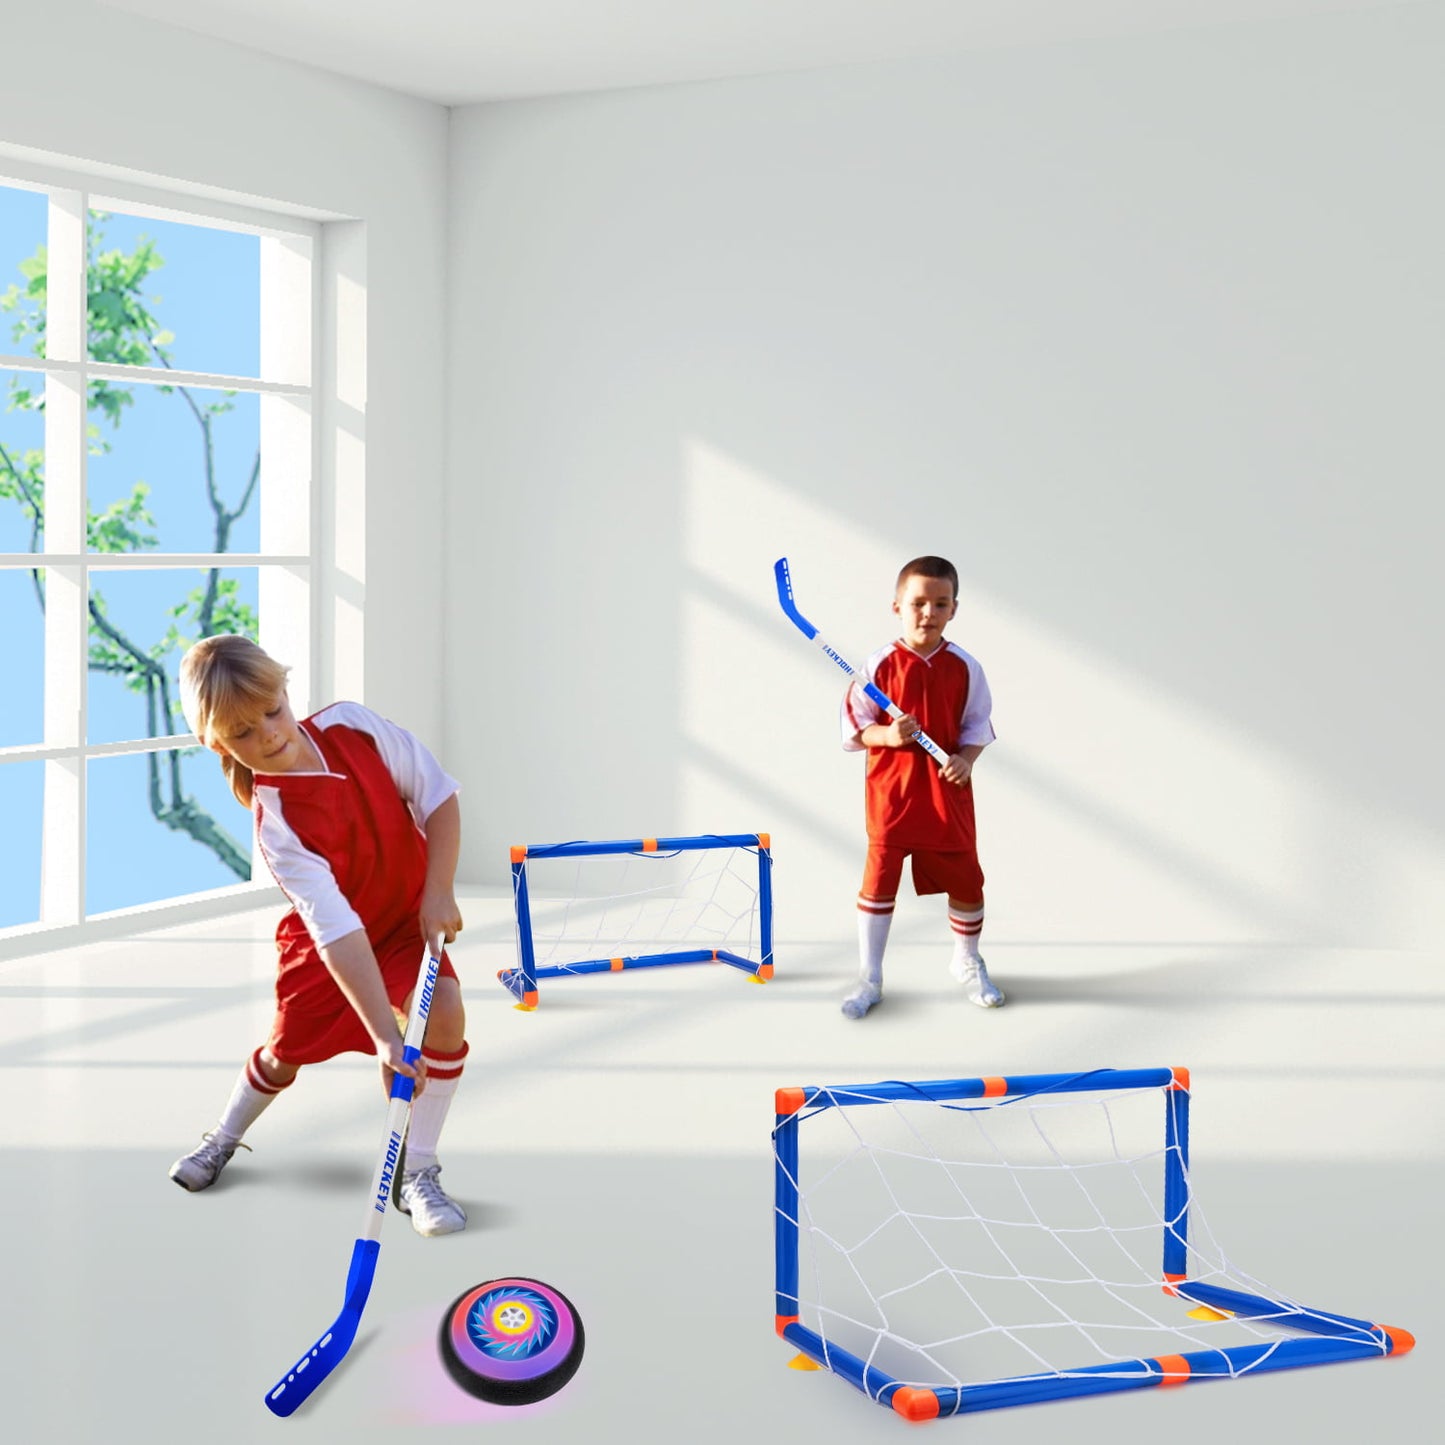 Hover Hockey Set for Kids, Led Light Air Hover Hockey with 2 Goals Indoor/Outdoor Game Toys Gifts for Kids 3+ Year Old